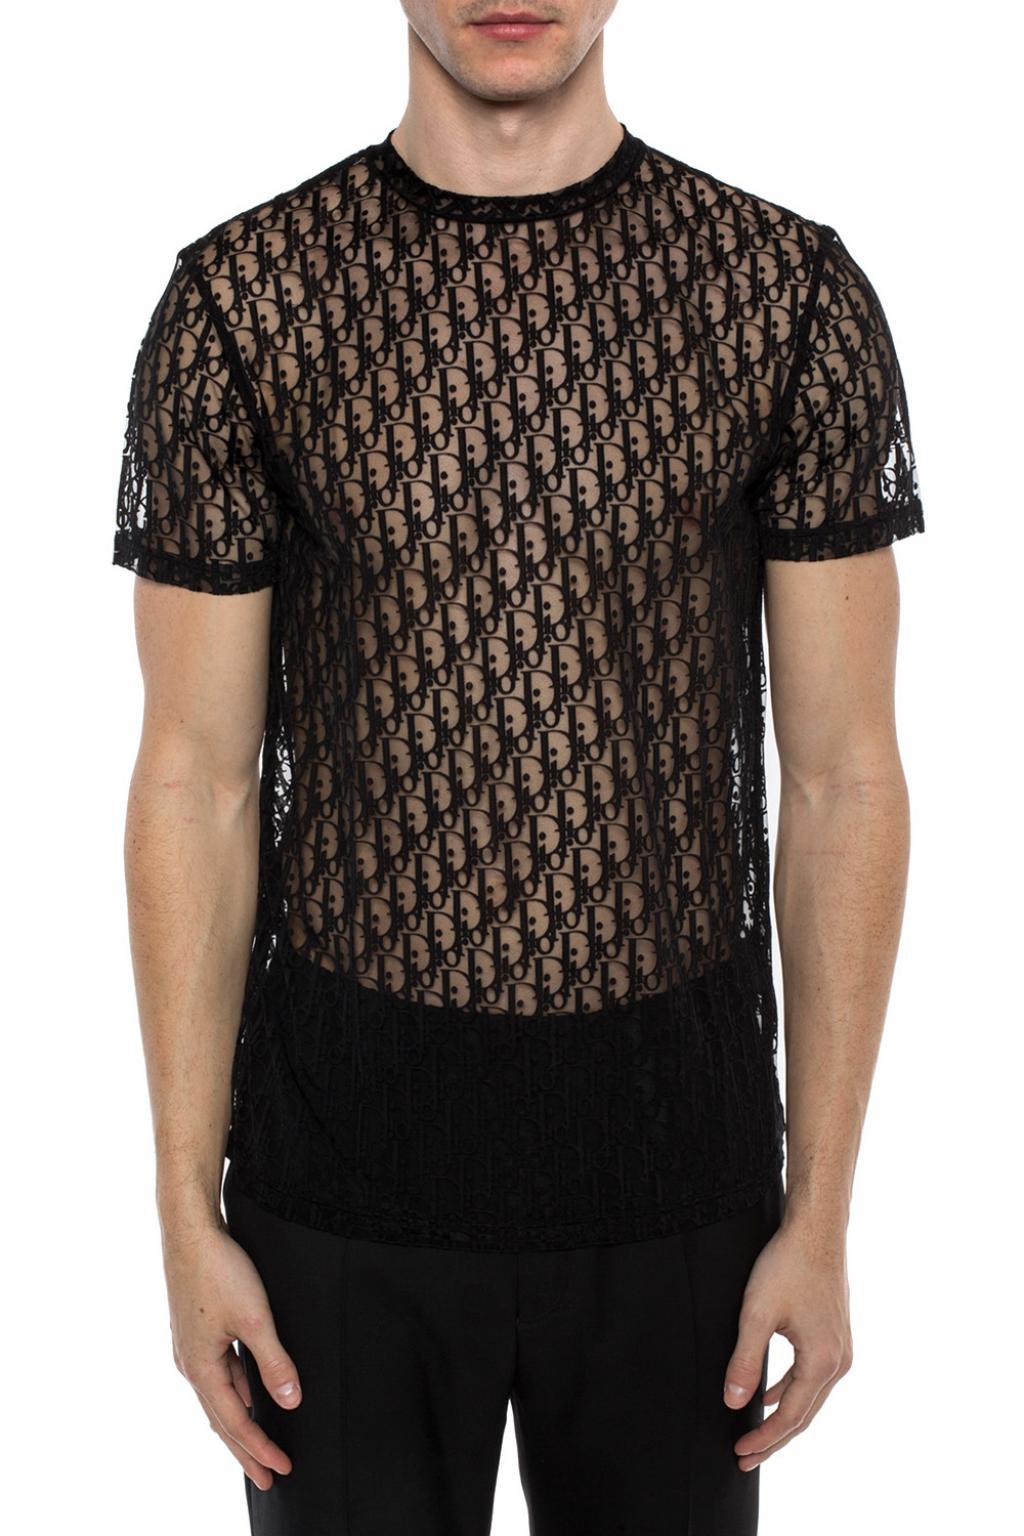 Dior Synthetic Sheer T-shirt With Logo in Black for Men - Lyst